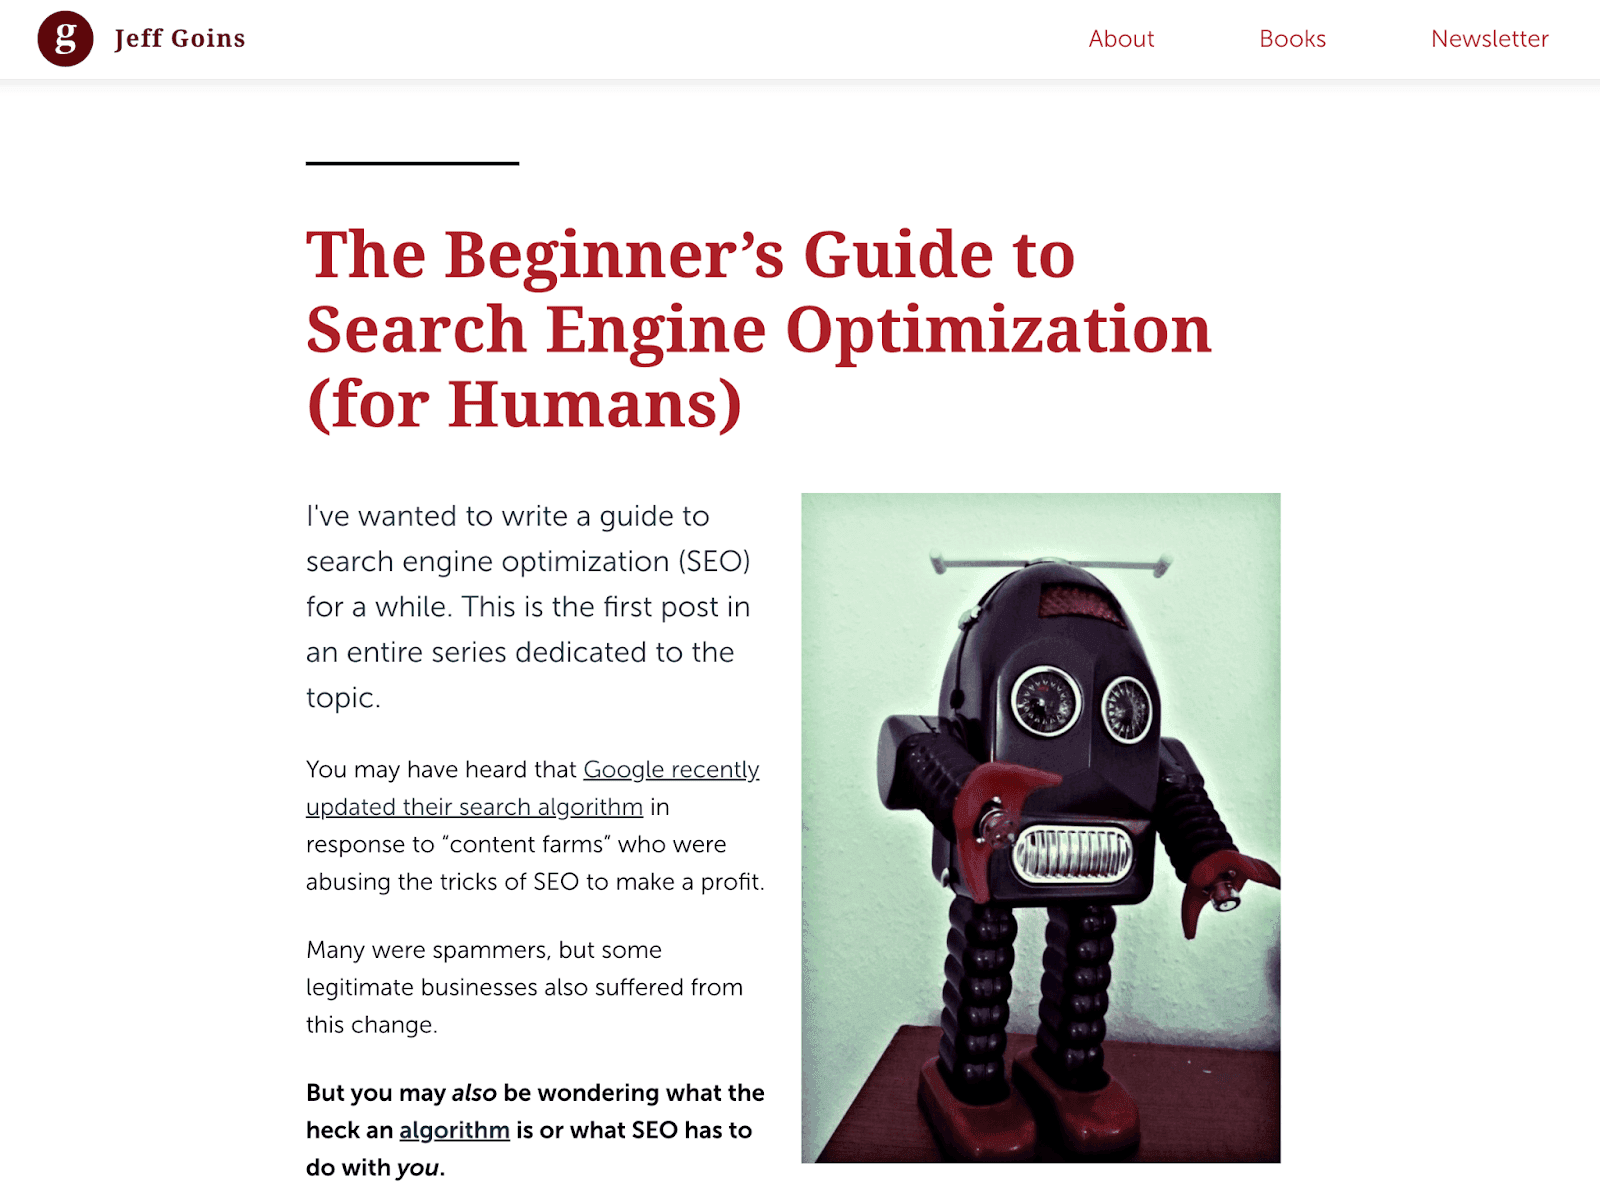 Jeff Goins presents the beginner's guide to search engine optimization for humans.